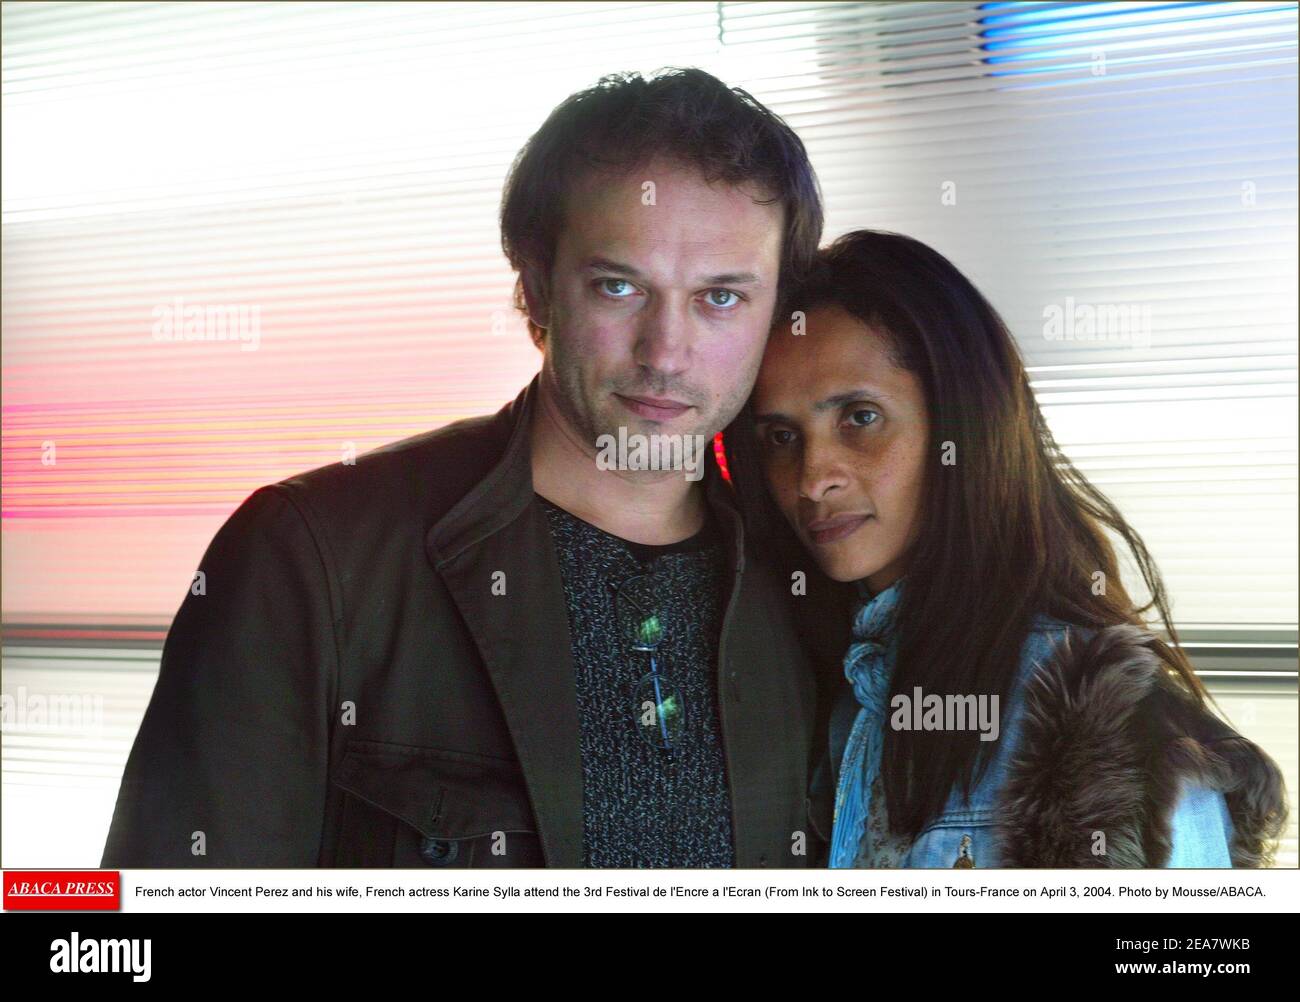 Swiss actor Vincent Perez and his wife, French actress Karine Sylla attend the 3rd Festival de l'Encre a l'Ecran (From Ink to Screen Festival) in Tours-France on April 3, 2004. Photo by Mousse/ABACA. Stock Photo